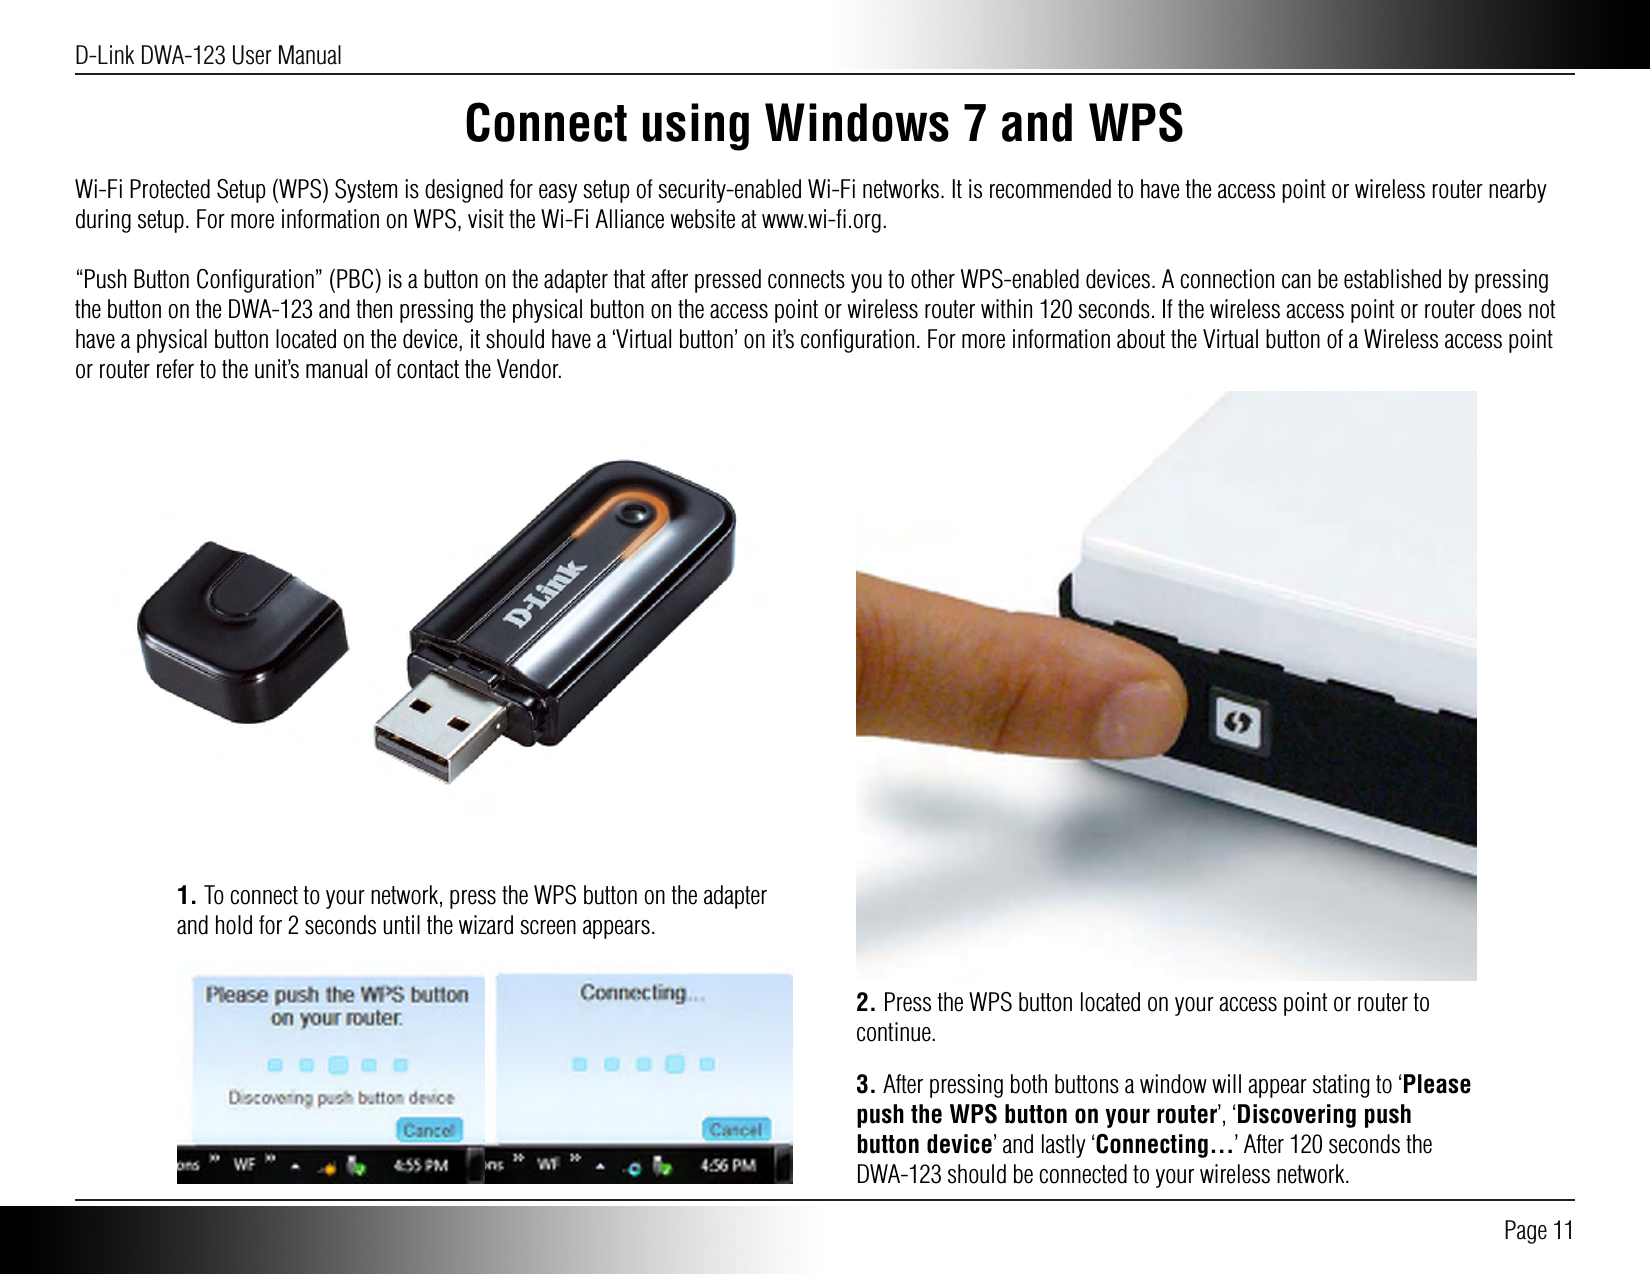 D-Link DWA-123 User Manual Page 11Connect using Windows 7 and WPSWi-Fi Protected Setup (WPS) System is designed for easy setup of security-enabled Wi-Fi networks. It is recommended to have the access point or wireless router nearby during setup. For more information on WPS, visit the Wi-Fi Alliance website at www.wi-ﬁ.org.“Push Button Conﬁguration” (PBC) is a button on the adapter that after pressed connects you to other WPS-enabled devices. A connection can be established by pressing the button on the DWA-123 and then pressing the physical button on the access point or wireless router within 120 seconds. If the wireless access point or router does not have a physical button located on the device, it should have a ‘Virtual button’ on it’s conﬁguration. For more information about the Virtual button of a Wireless access point or router refer to the unit’s manual of contact the Vendor.2. Press the WPS button located on your access point or router to continue. 1. To connect to your network, press the WPS button on the adapter and hold for 2 seconds until the wizard screen appears.3. After pressing both buttons a window will appear stating to ‘Please push the WPS button on your router’, ‘Discovering push button device’ and lastly ‘Connecting...’ After 120 seconds the DWA-123 should be connected to your wireless network.